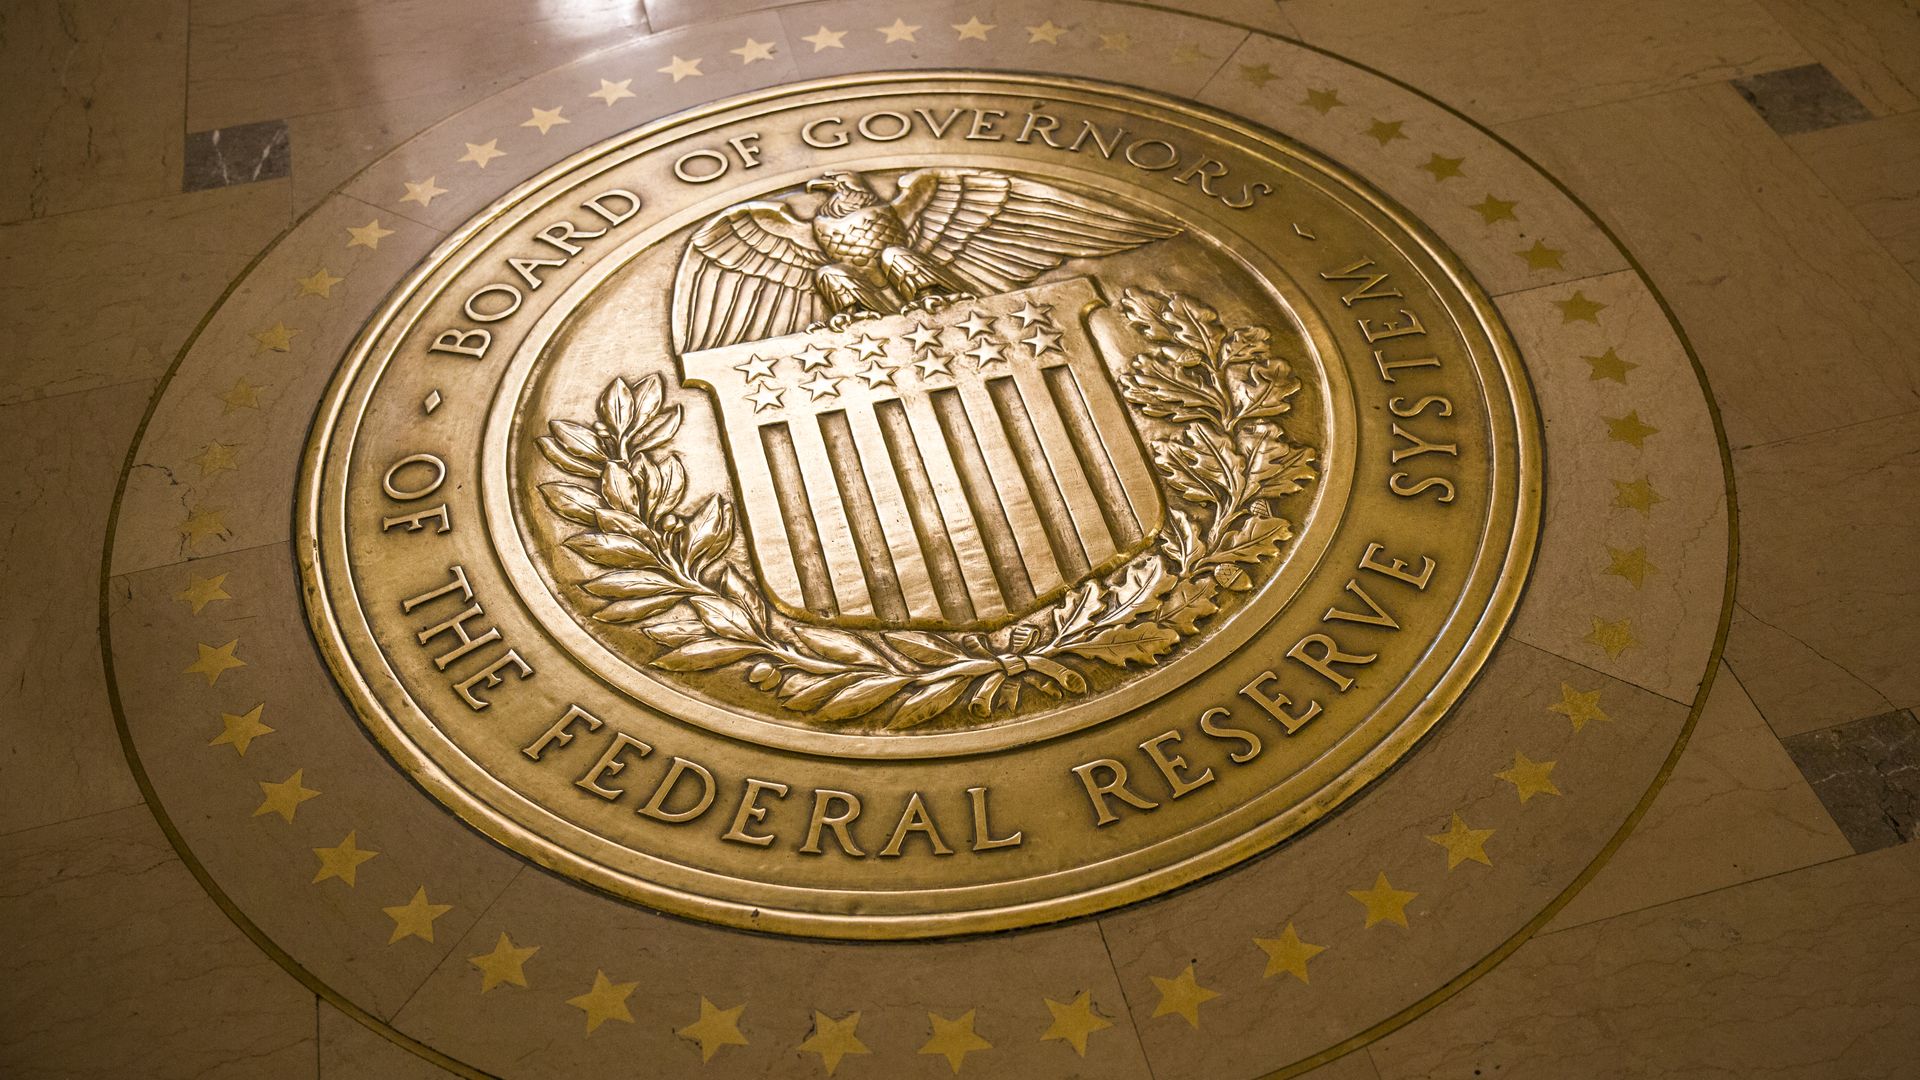 A gold plated seal outside inside the Eccles Building, the place of the Board of Governors of the Federal Reserve System